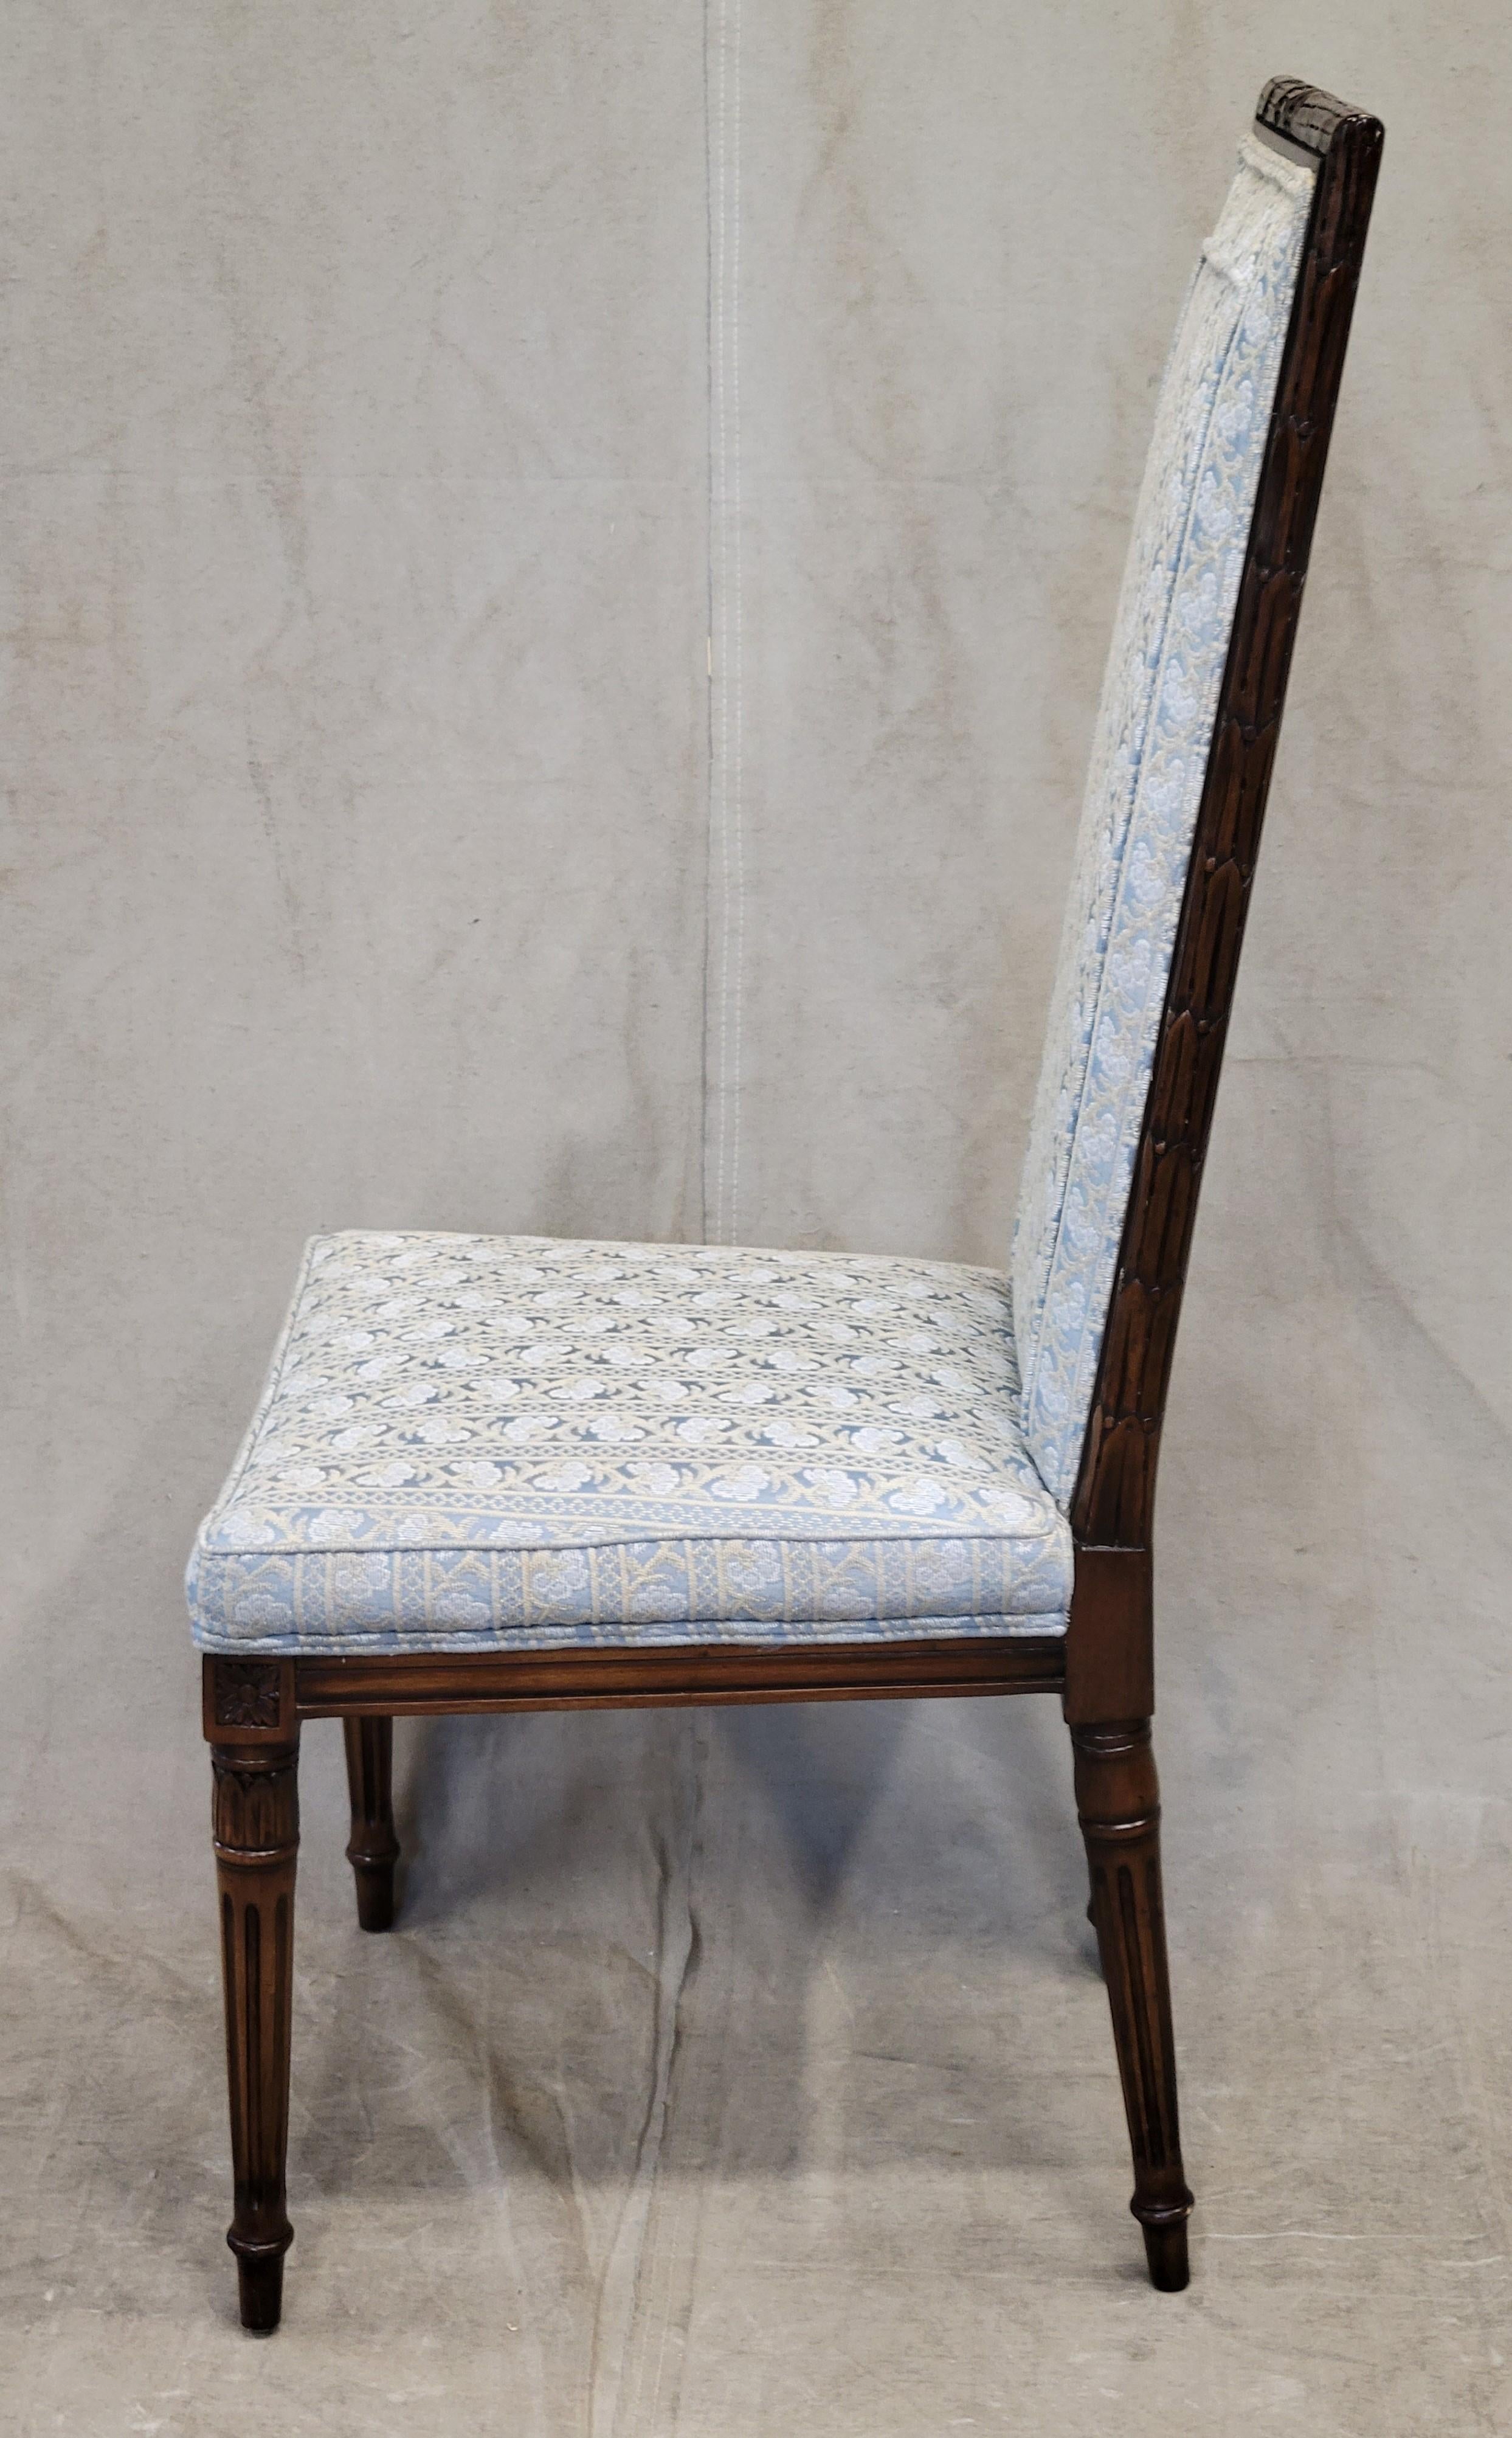 Late 20th Century Vintage Karges Neoclassical Dining Chairs With Pale Blue Upholstery - Set of 8